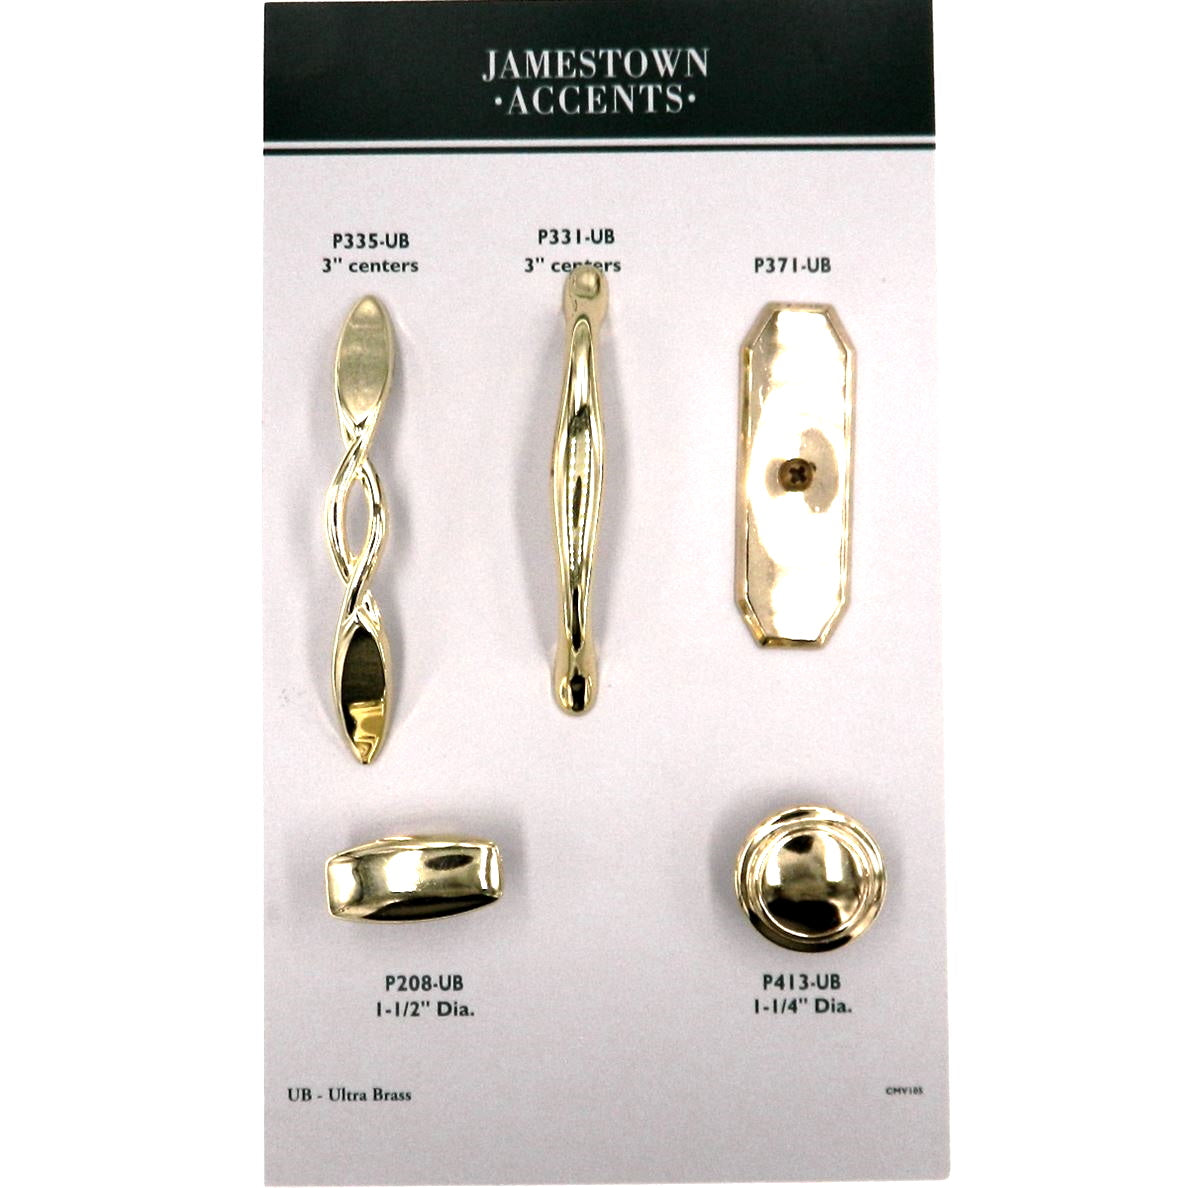 10 Pack Hickory Eclipse P331-UB Ultra Brass 3"cc Arch Cabinet Handle Pull